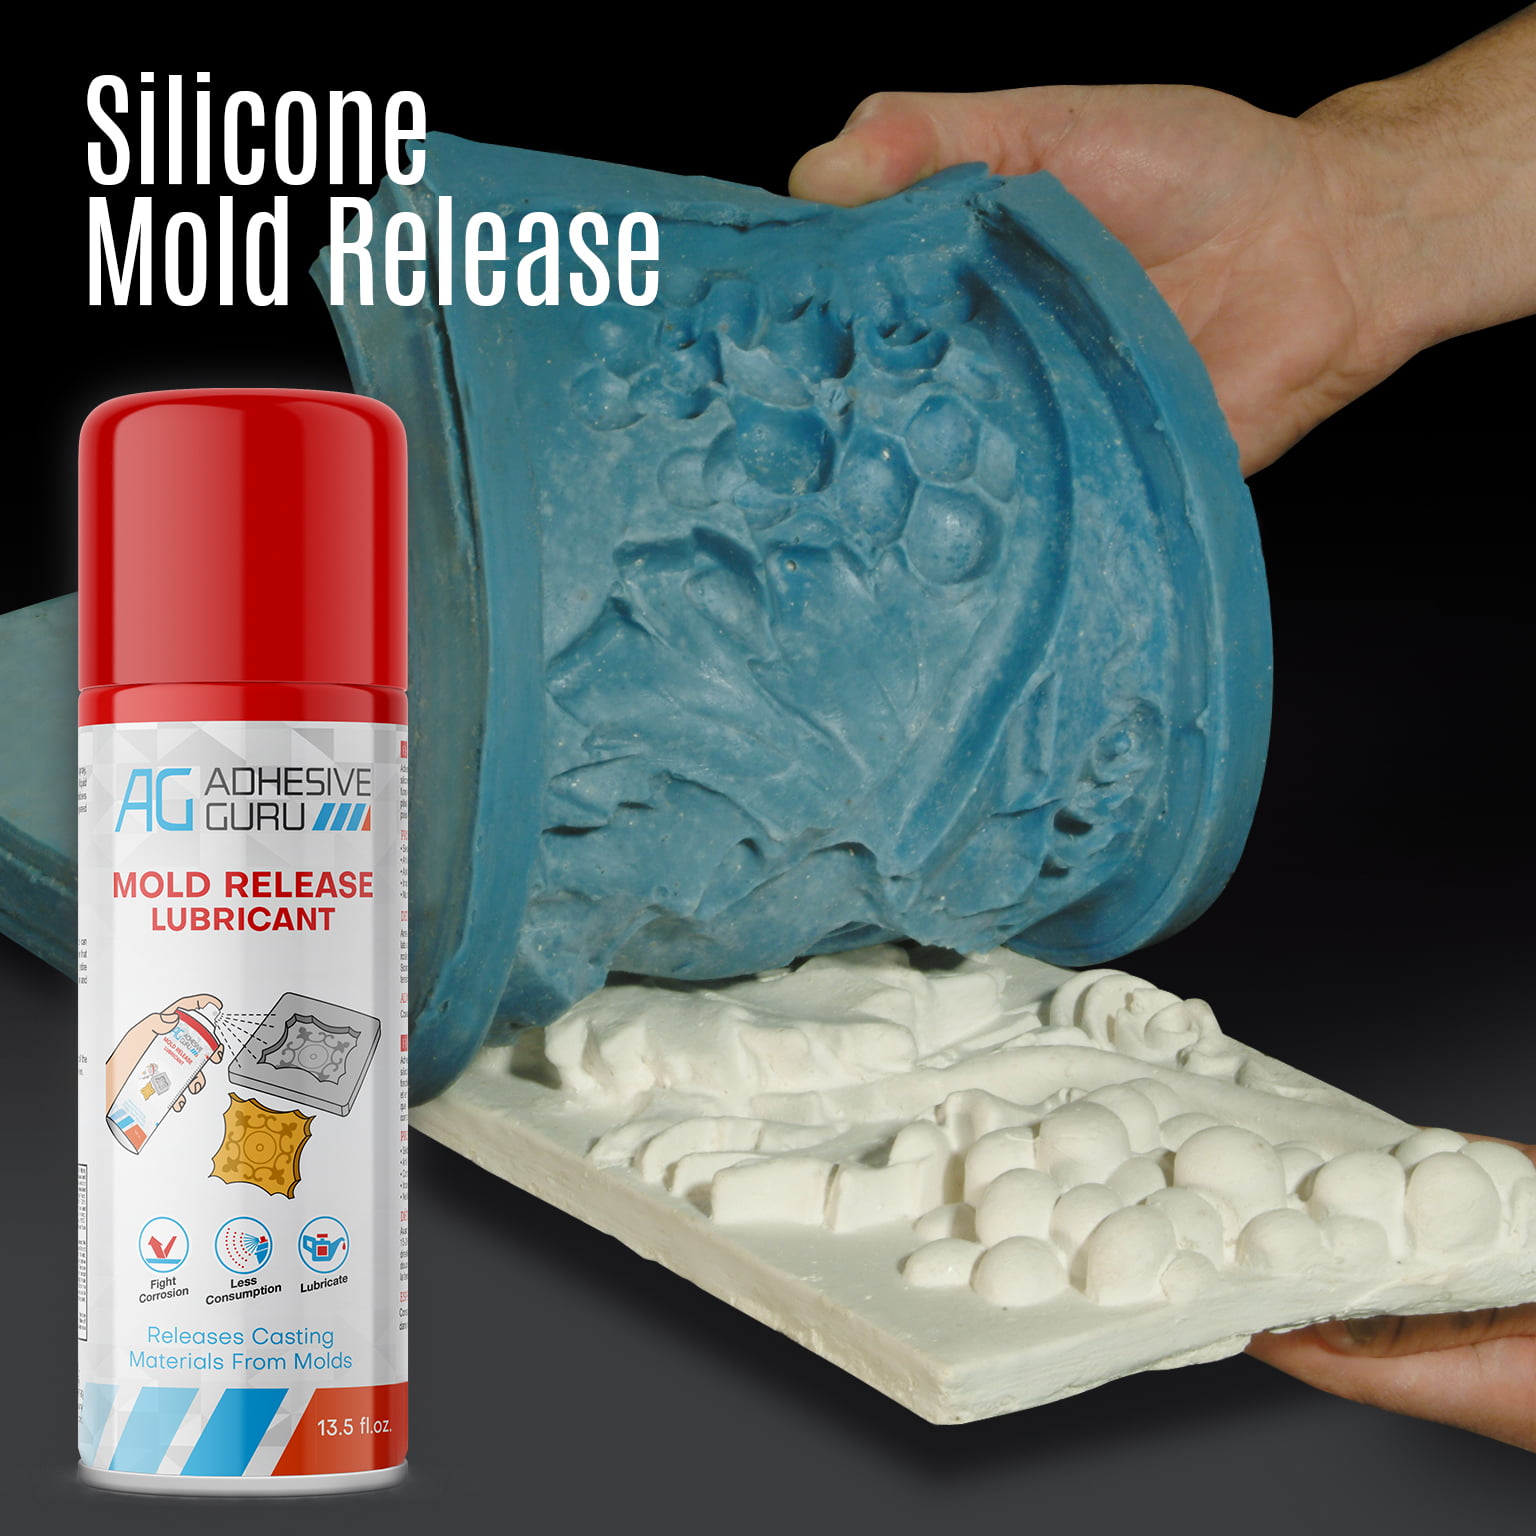 MagicChems - Silicone Mold Release Spray (2 x 16.9 fl oz) Release